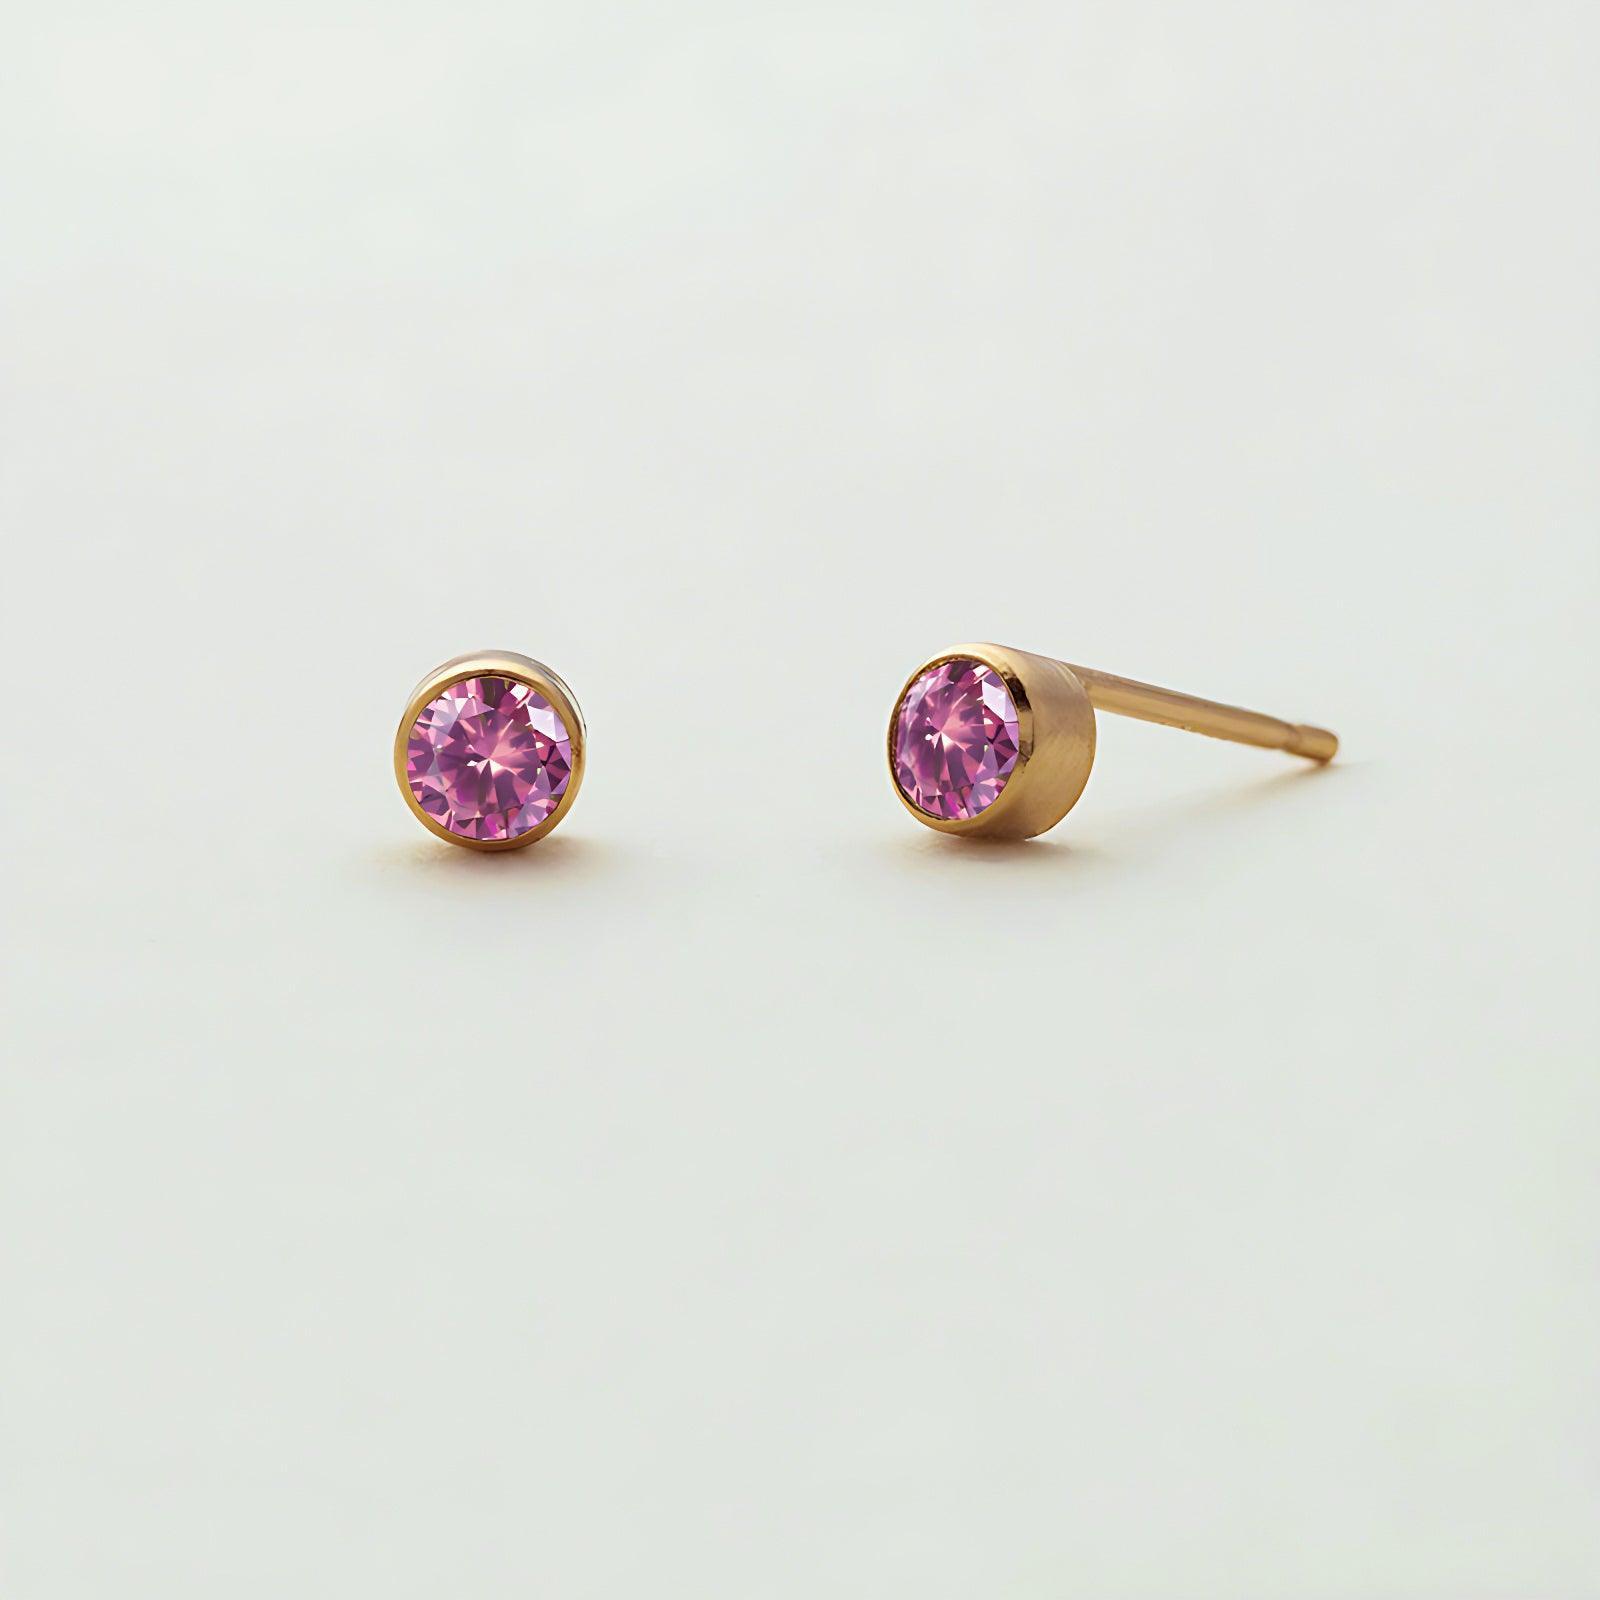 July Birthstone Cute Earrings in 2023 | July Birthstone Cute Earrings - undefined | birthstone earring, birthstone jewelry, Creative Cute Earrings, july birthstone, July birthstone is Ruby, June Birthstone Earrings | From Hunny Life | hunnylife.com